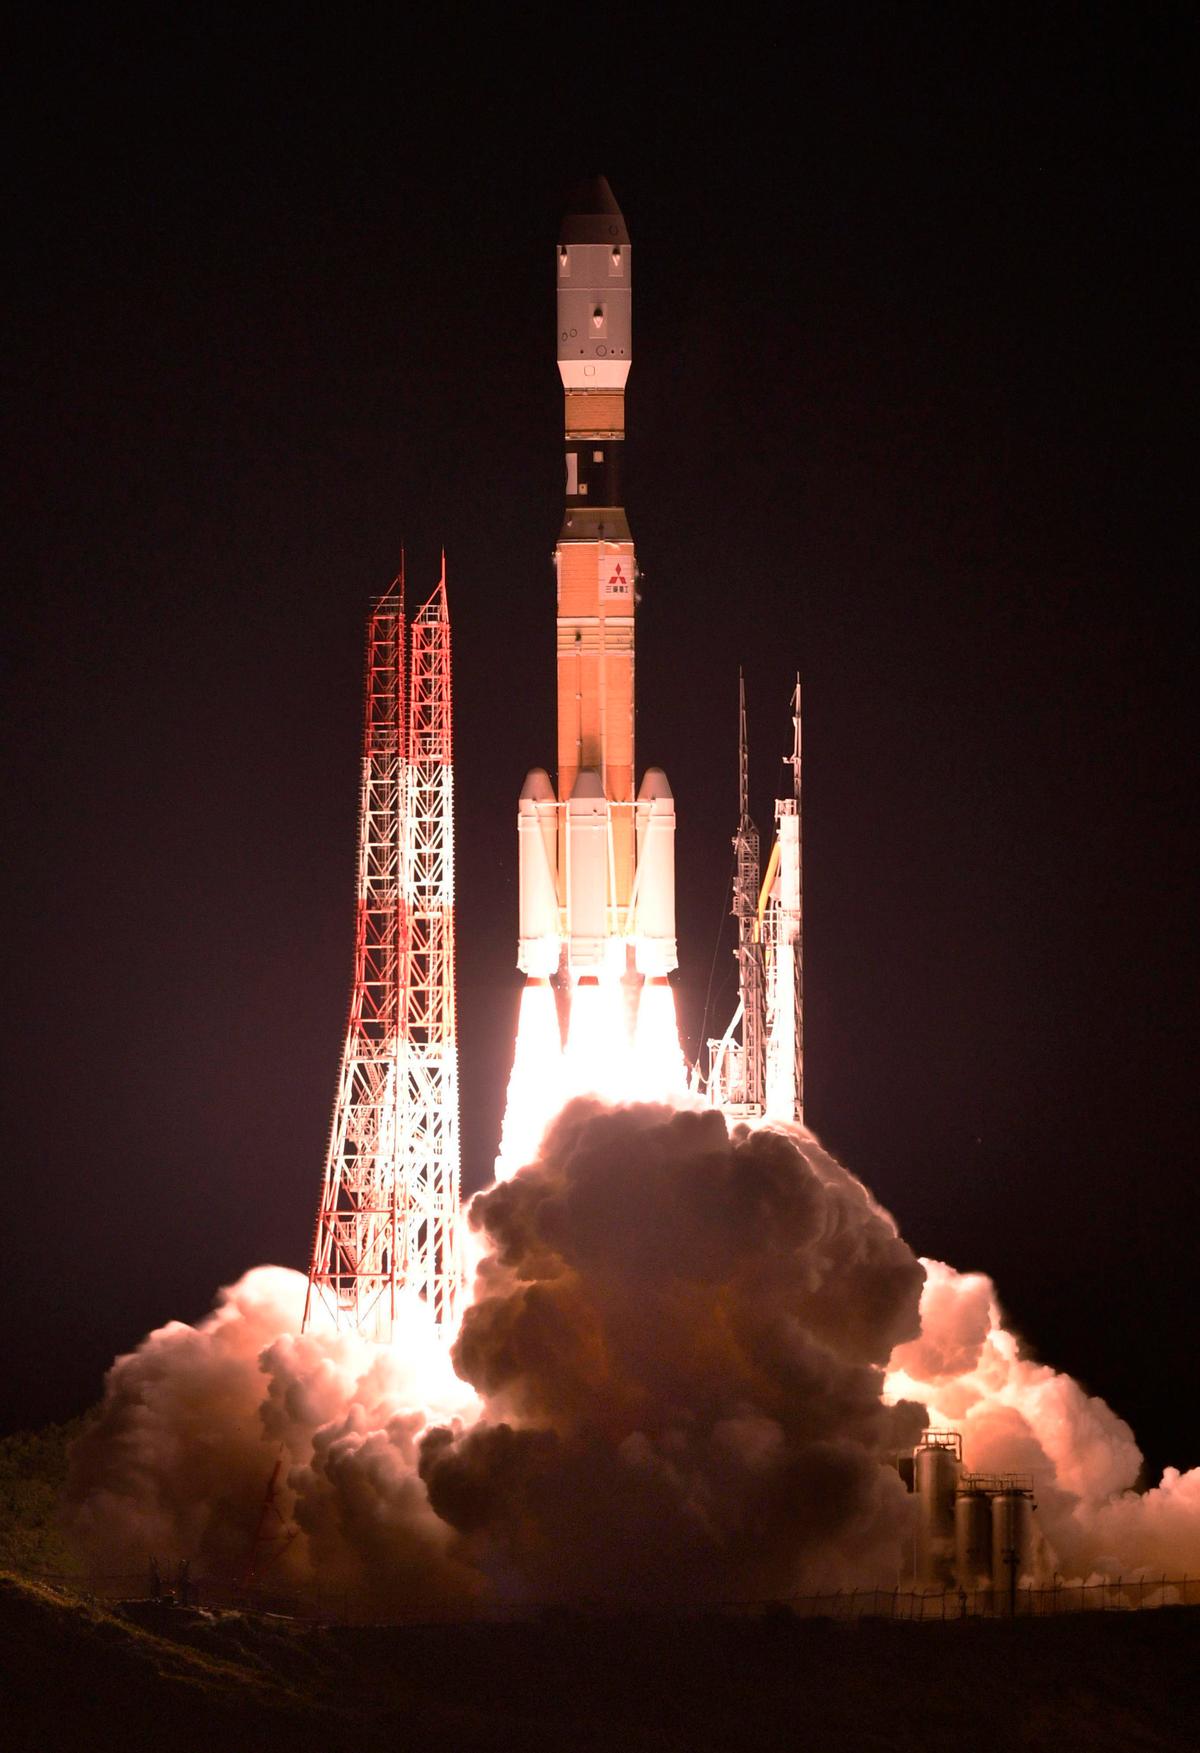 An H-2B rocket carrying the Kounotori 7 cargo spacecraft lifts off from Tanegashima Space Center in the southwestern Japan prefecture of Kagoshima, early Sept. 23, 2018. The unmanned Japanese space capsule is heading to the International Space Station with 5,500 kilograms (12,000 pounds) of cargo including food, experiments and new batteries. (By Kyodo News/AP)